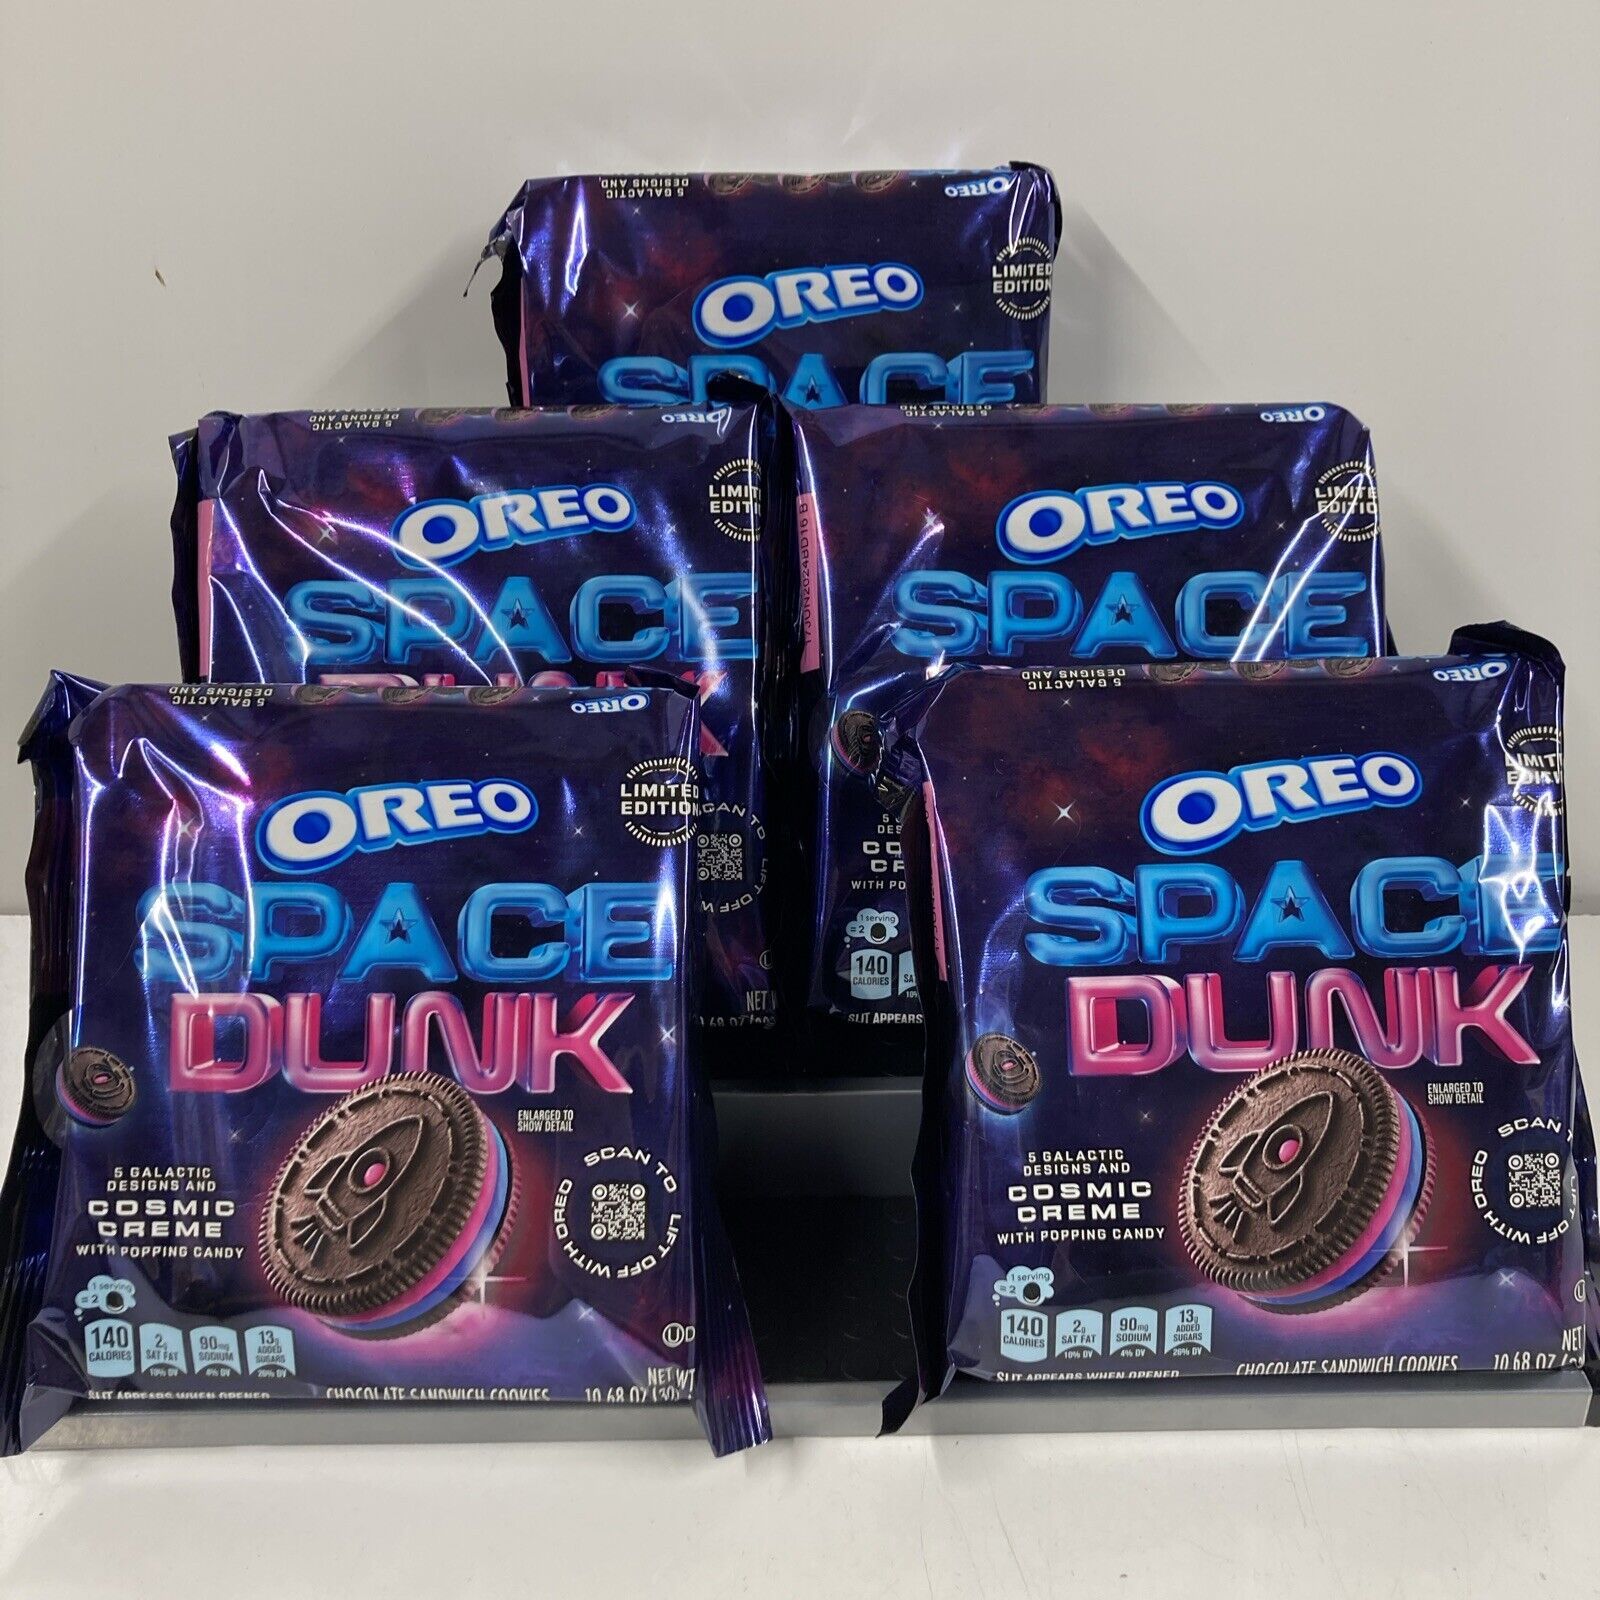 LOT x5 OREO Space Dunk Limited Edition Chocolate Sandwich Cookies Cosmic Creme 